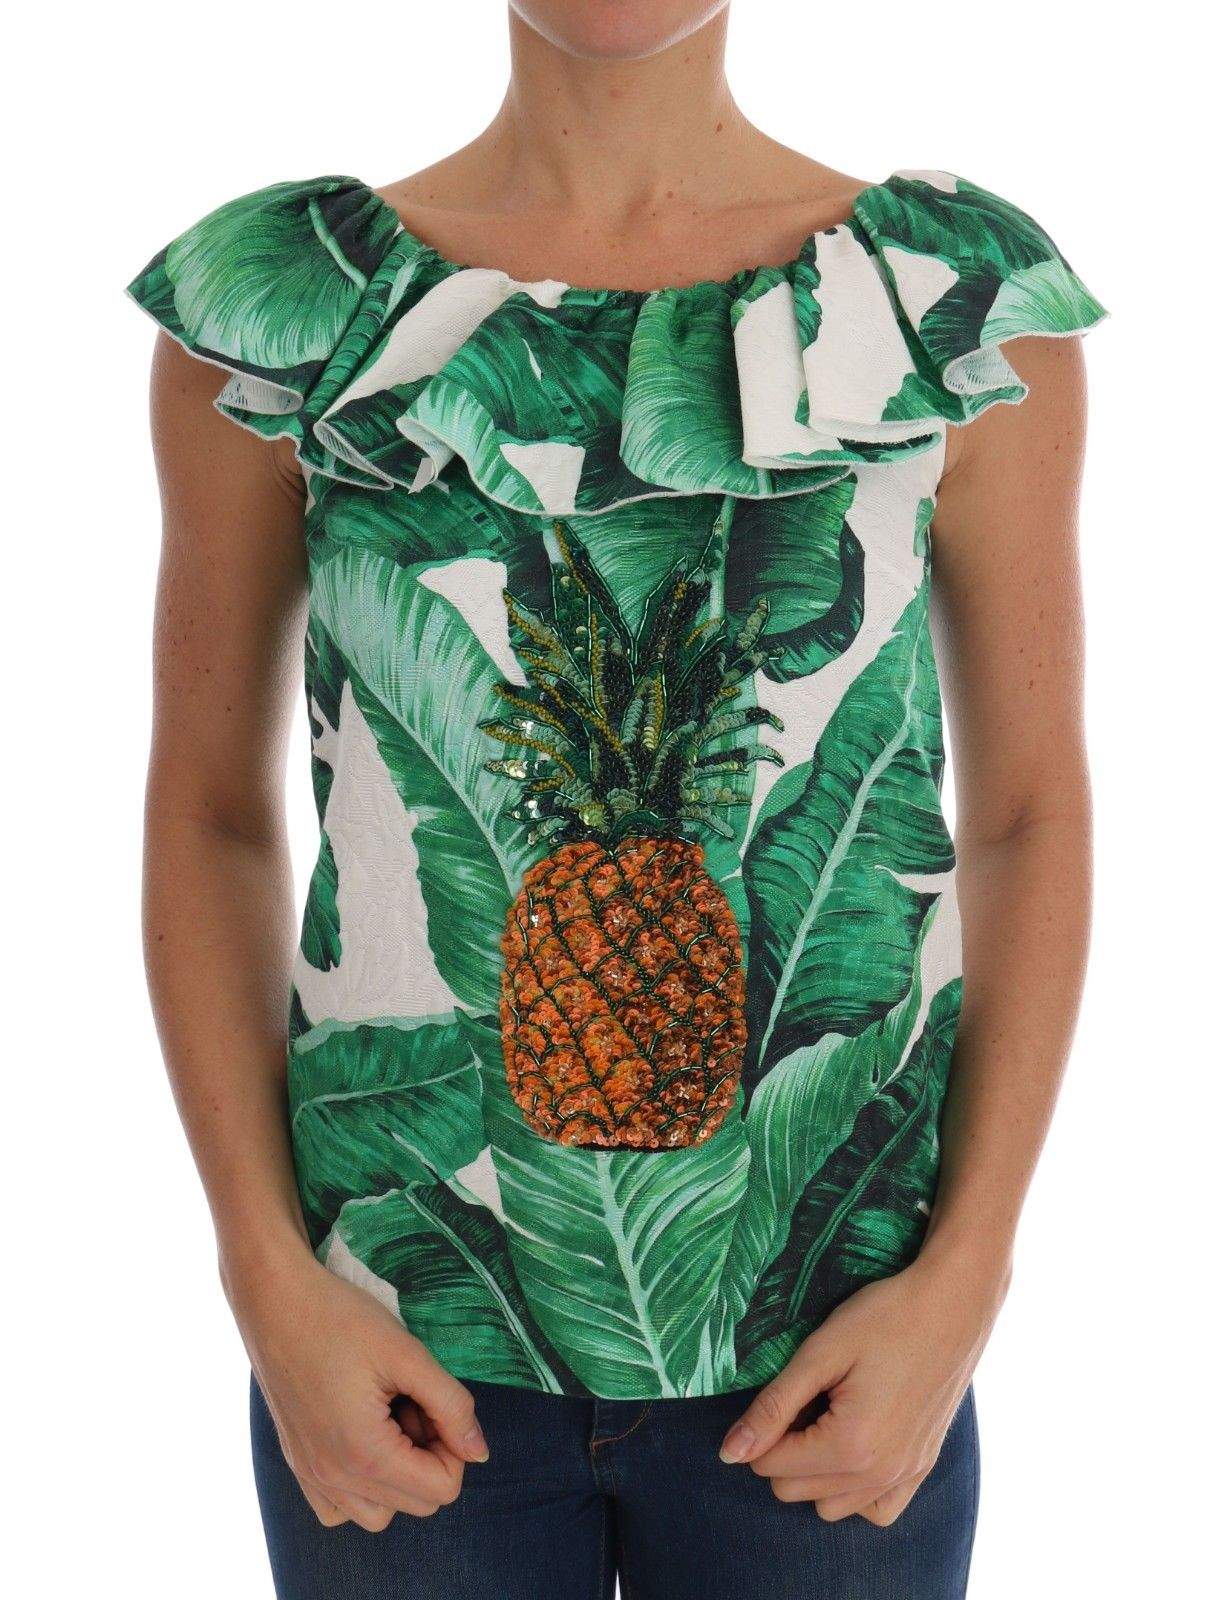 Dolce & Gabbana Pineapple Banana Sequins Blouse T-shirt #women, Dolce & Gabbana, feed-agegroup-adult, feed-color-Green, feed-gender-female, Green, IT36 | XS, IT38|XS, IT40|S, IT42|M, IT46|XL, Tops & T-Shirts - Women - Clothing, Women - New Arrivals at SEYMAYKA